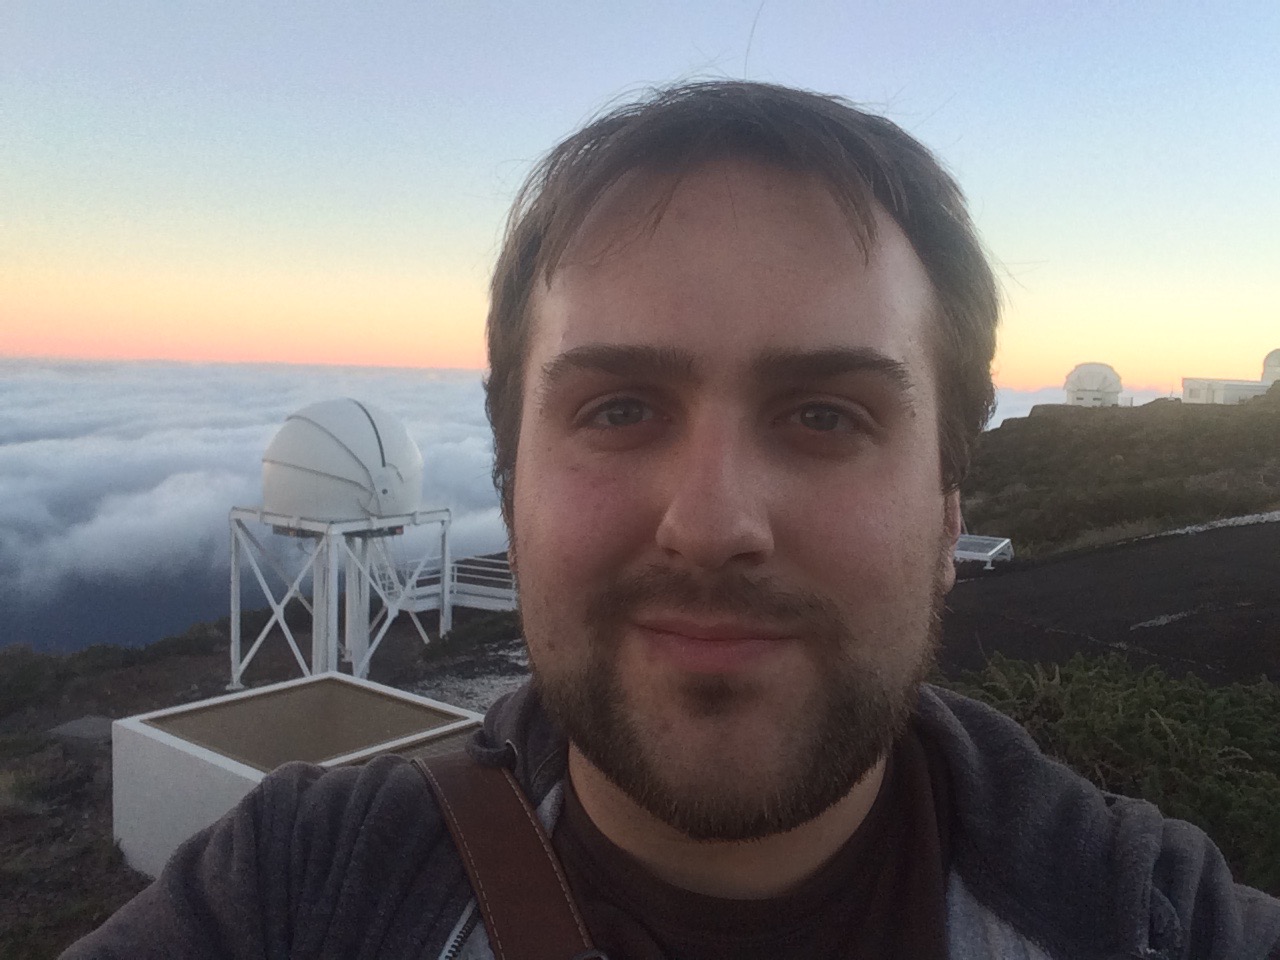 Stood by the William Herschel Telescope at the Roque de los Muchachos Observatory, La Palma as the Sun rises.